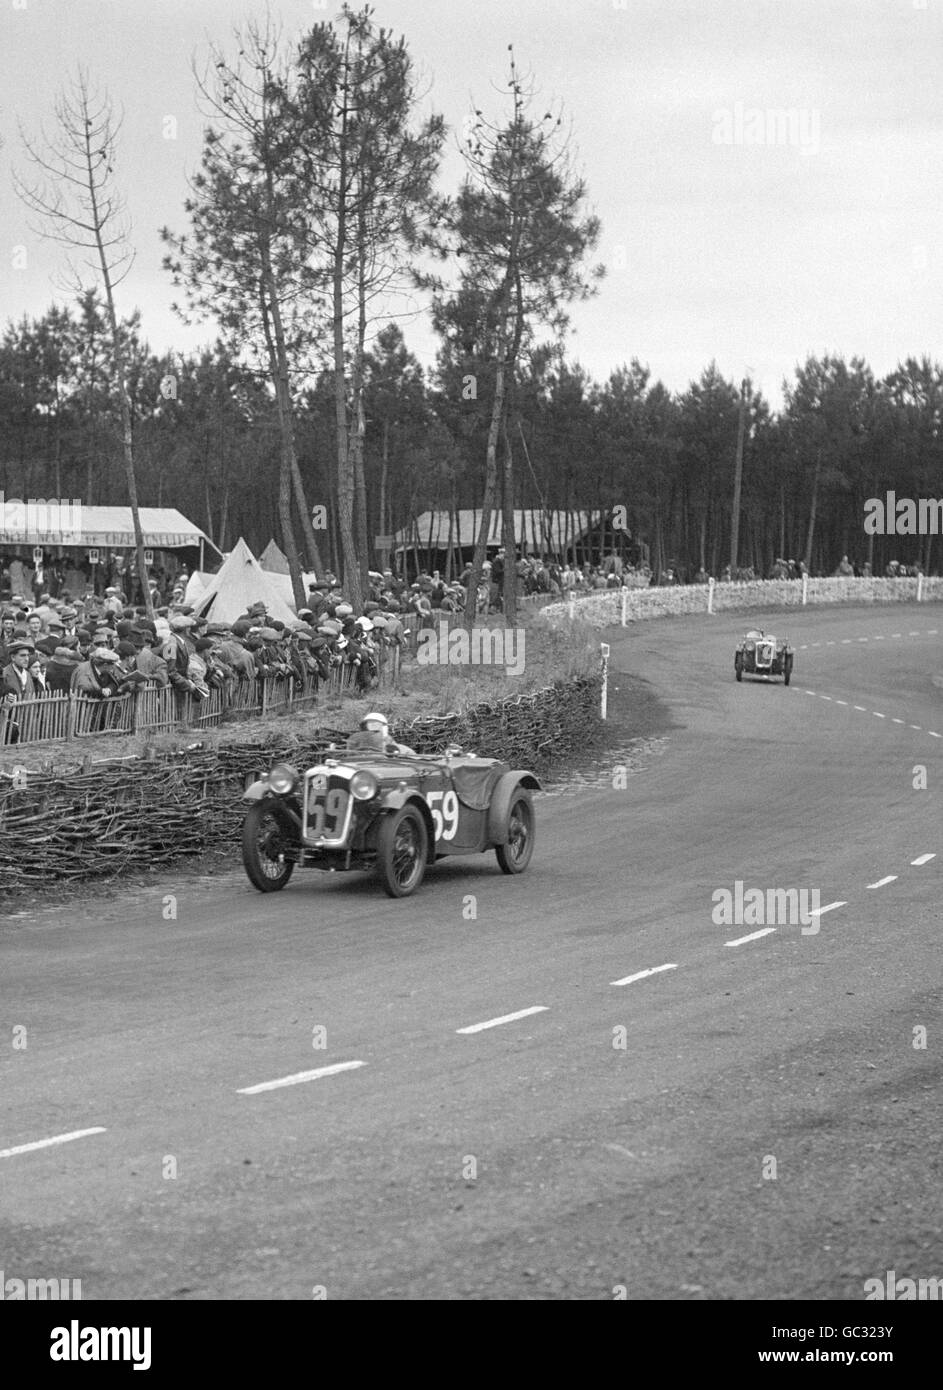 Motor Racing - Le Mans 24 Hour Race. Charles Dodson in his Austin 7 Speedy (no.59) during the Le Mans 24 Hour Race. Stock Photo